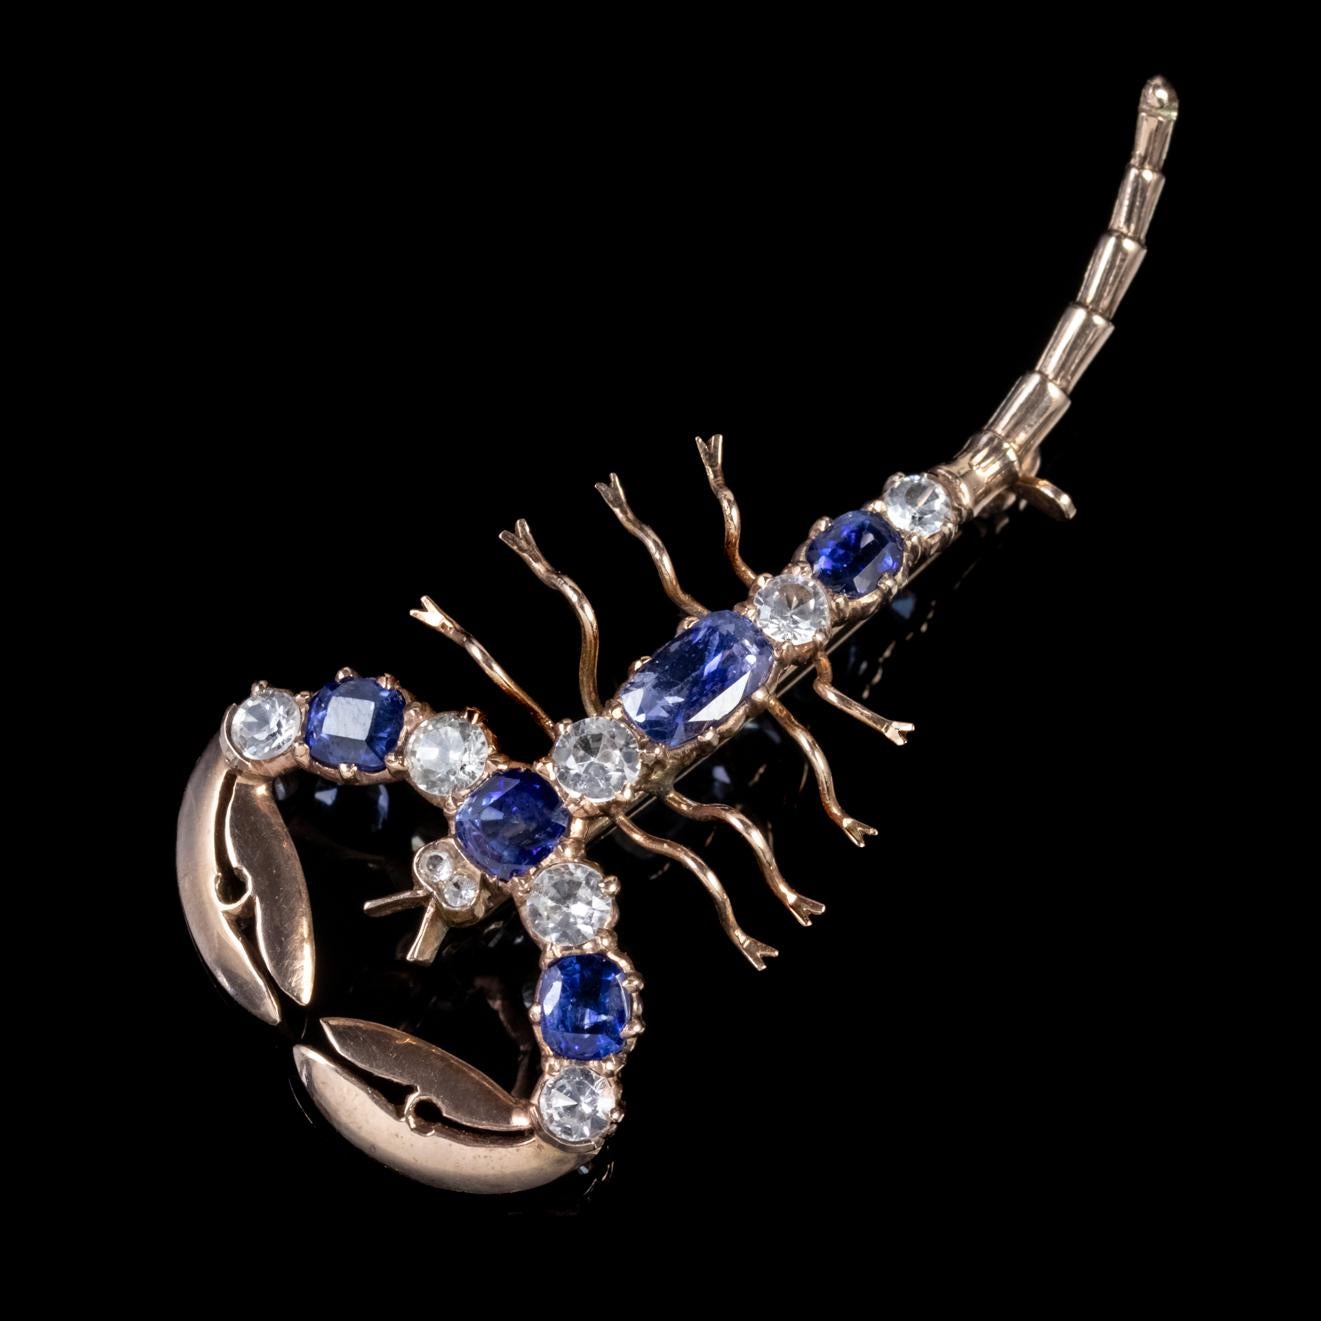 A remarkable Antique Victorian Scorpion brooch set with five gorgeous natural blue Sapphires which total to approx. 2.50ct and nine sparkling White Sapphires which total around 1.50ct. 

Bug and Insect jewellery was once considered a symbol of good